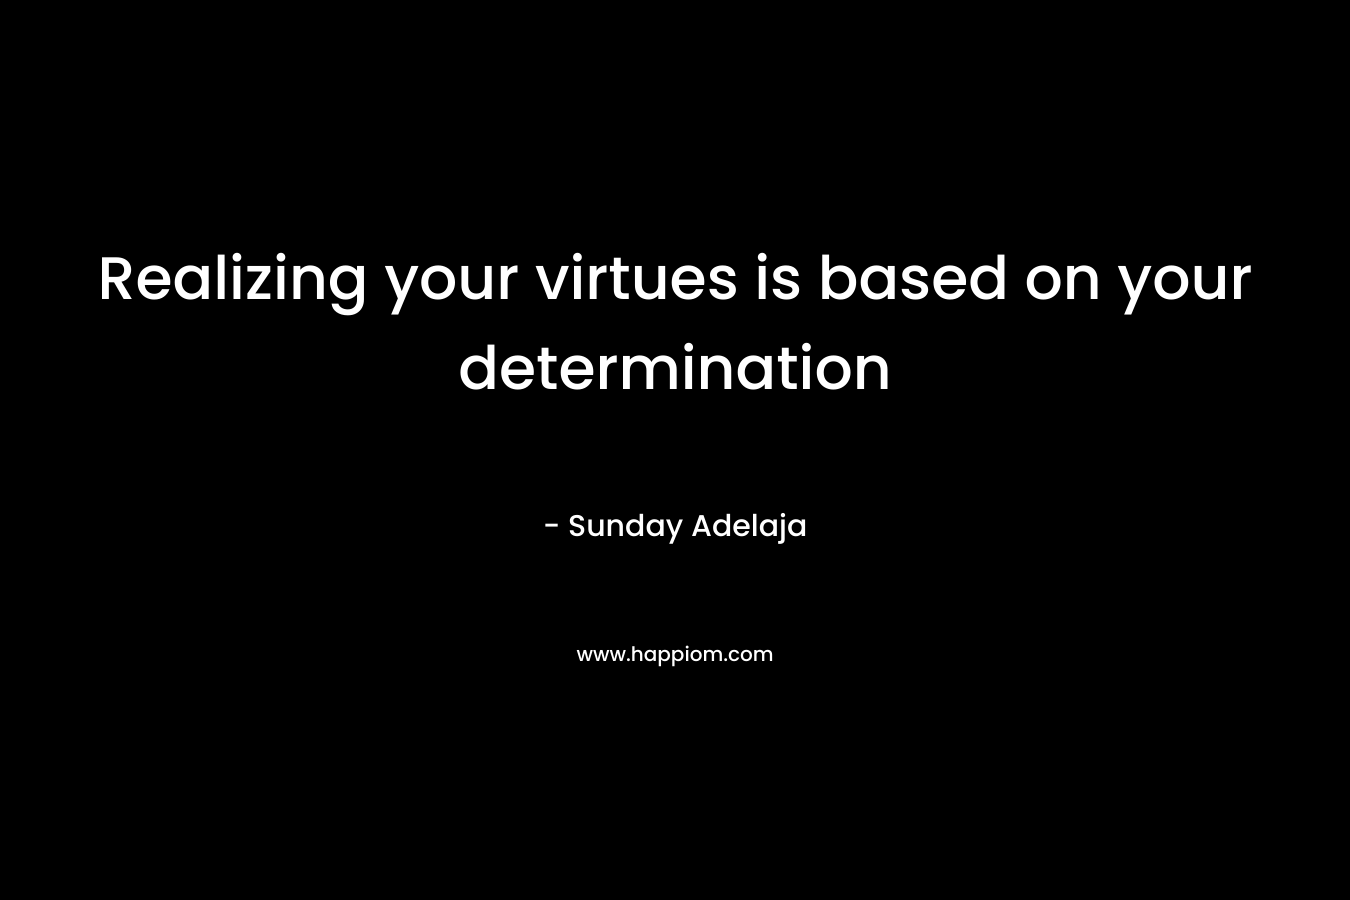 Realizing your virtues is based on your determination